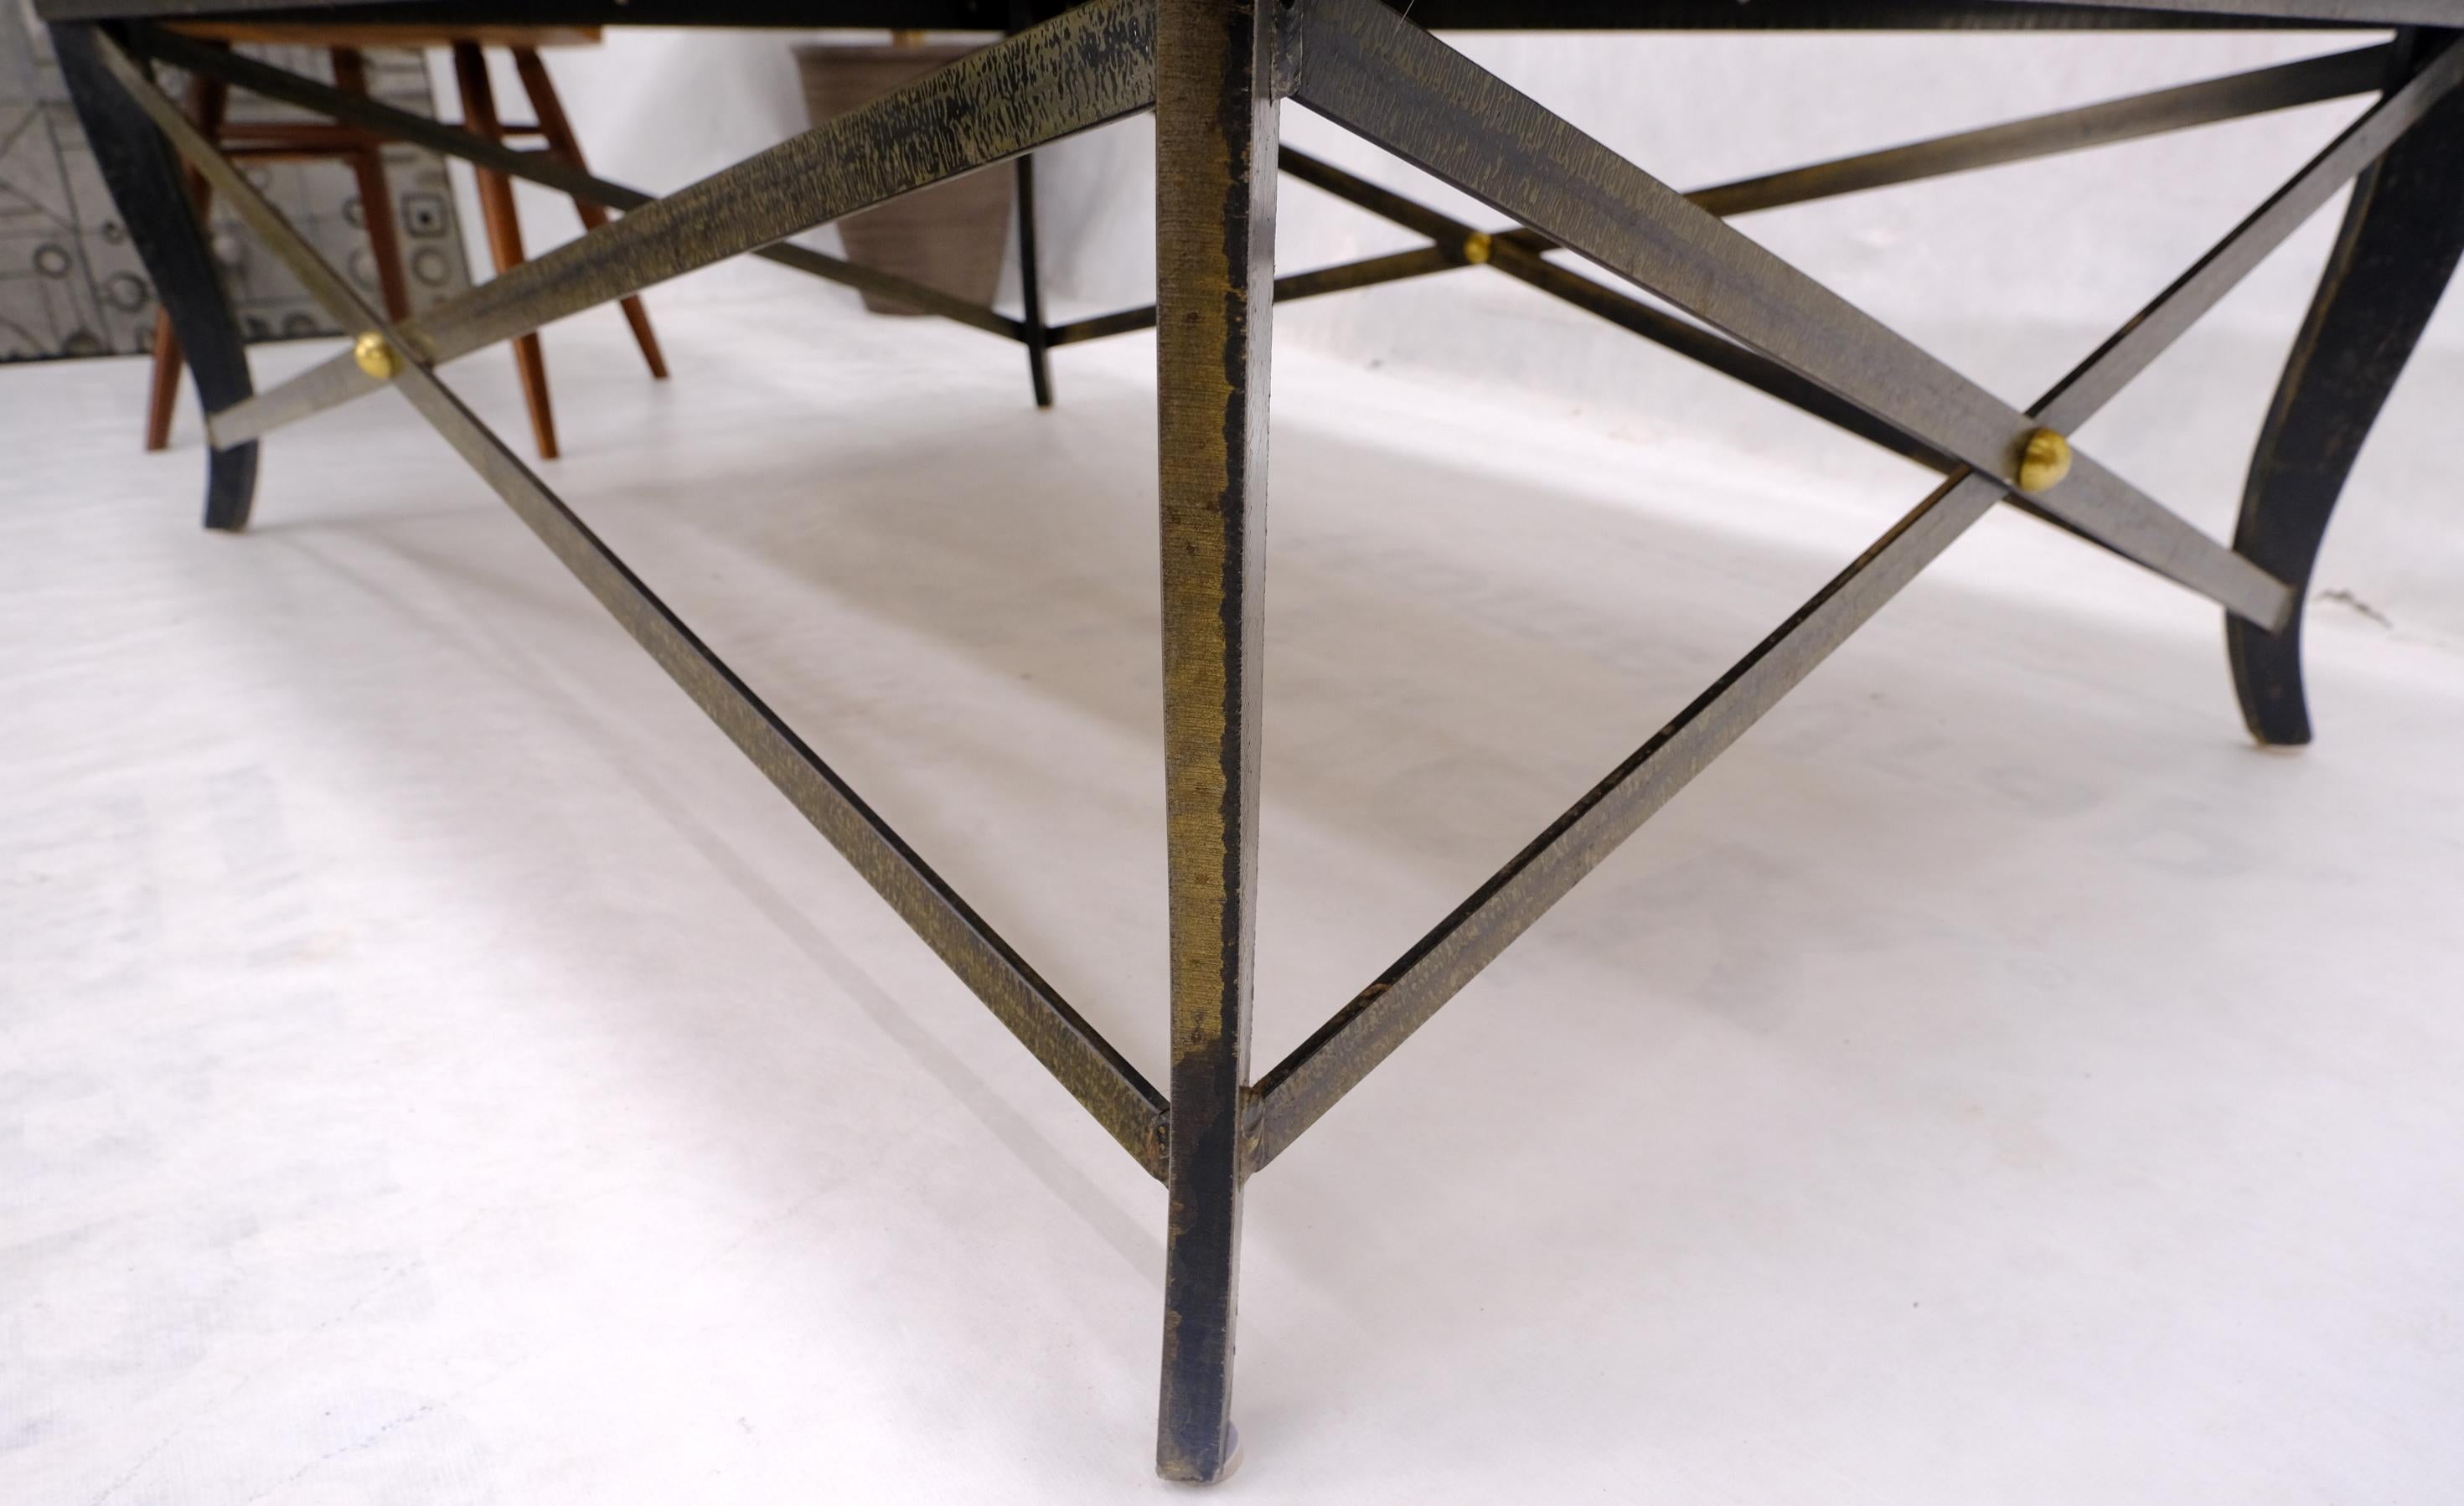 Steel Metal Forged X Base Travertine Top Rectangle Coffee Table w/ Brass Studs In Excellent Condition For Sale In Rockaway, NJ